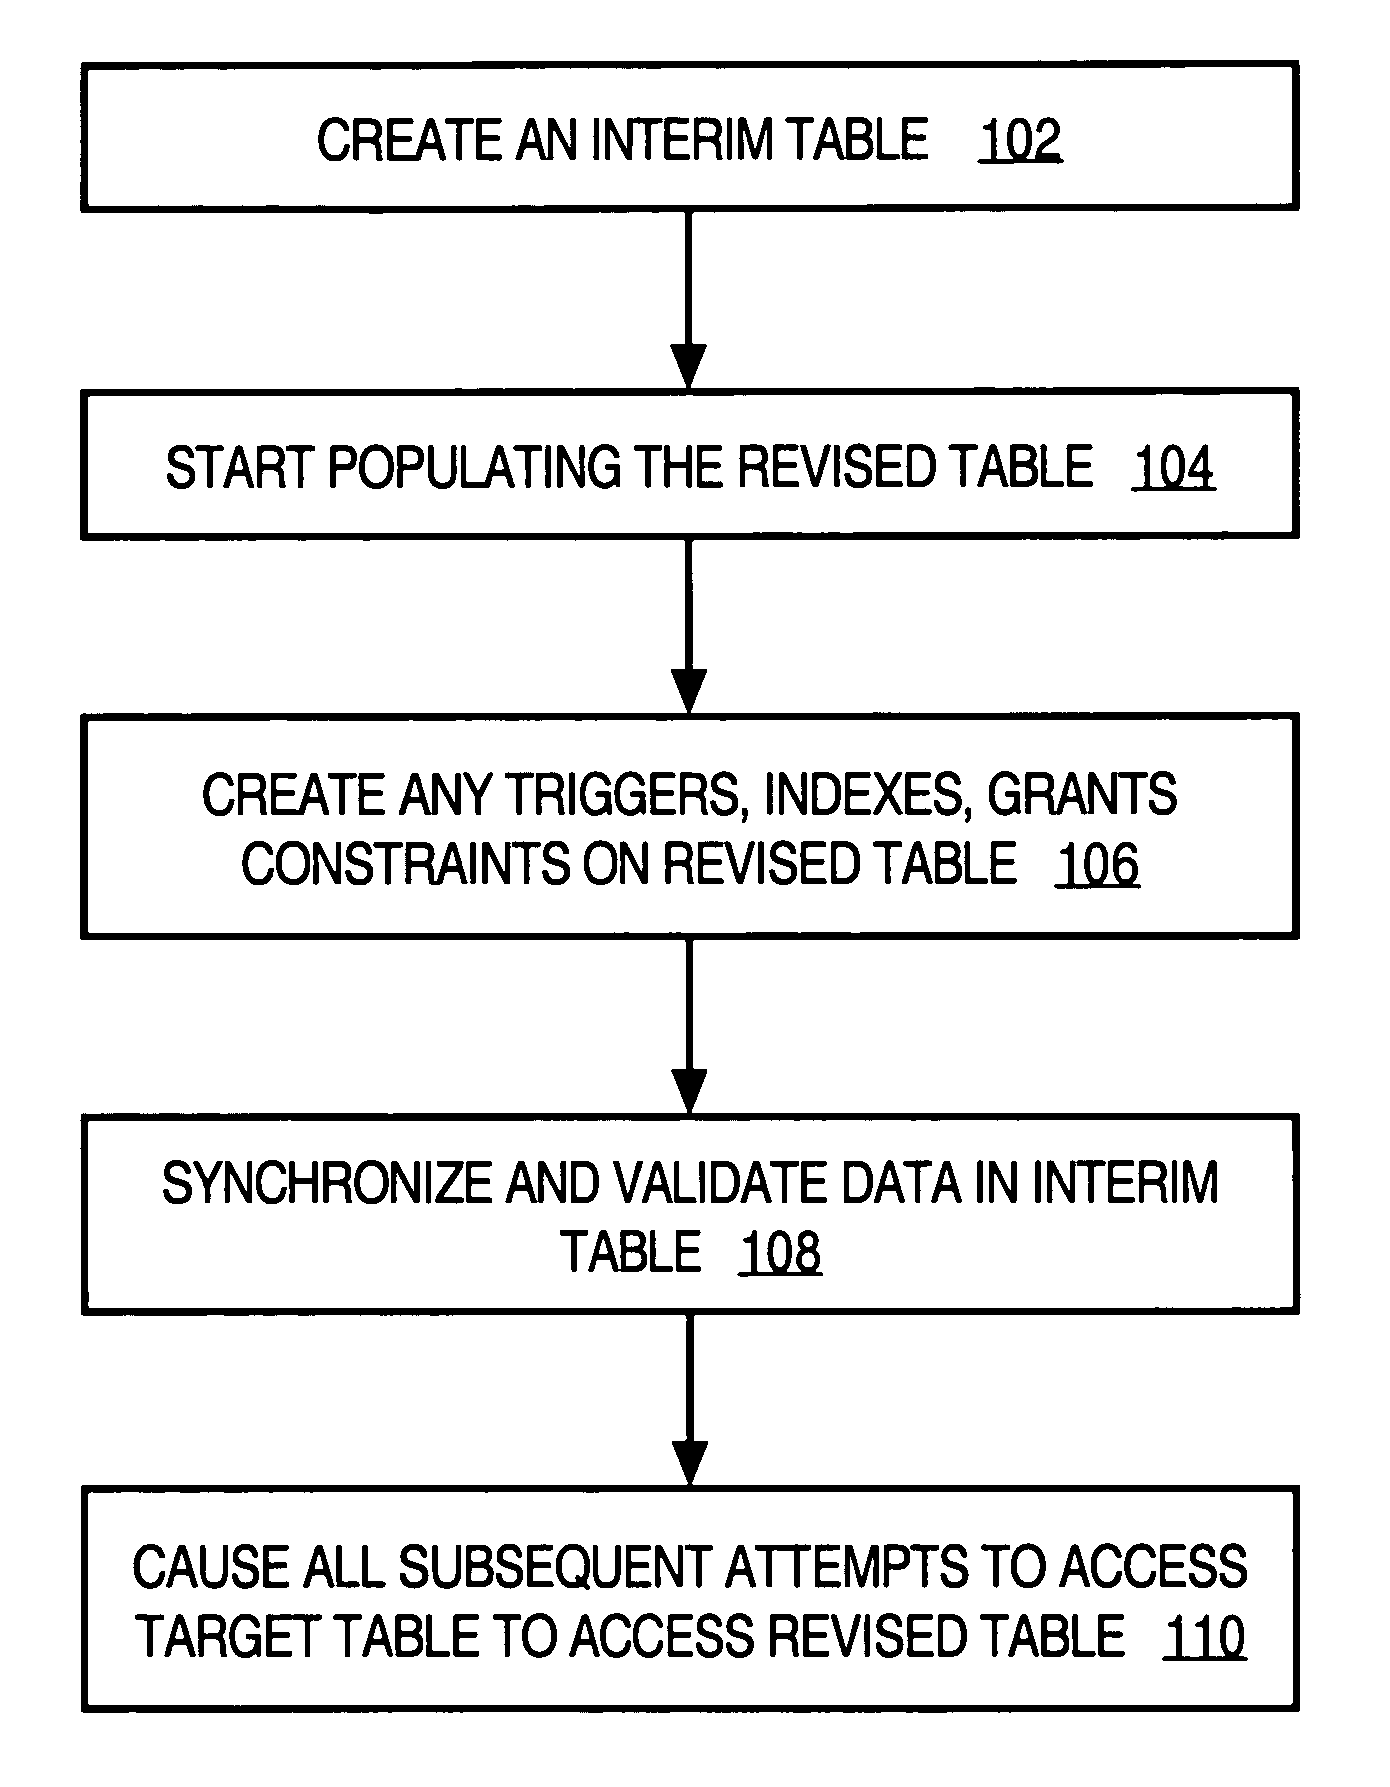 Online reorganization and redefinition of relational database tables